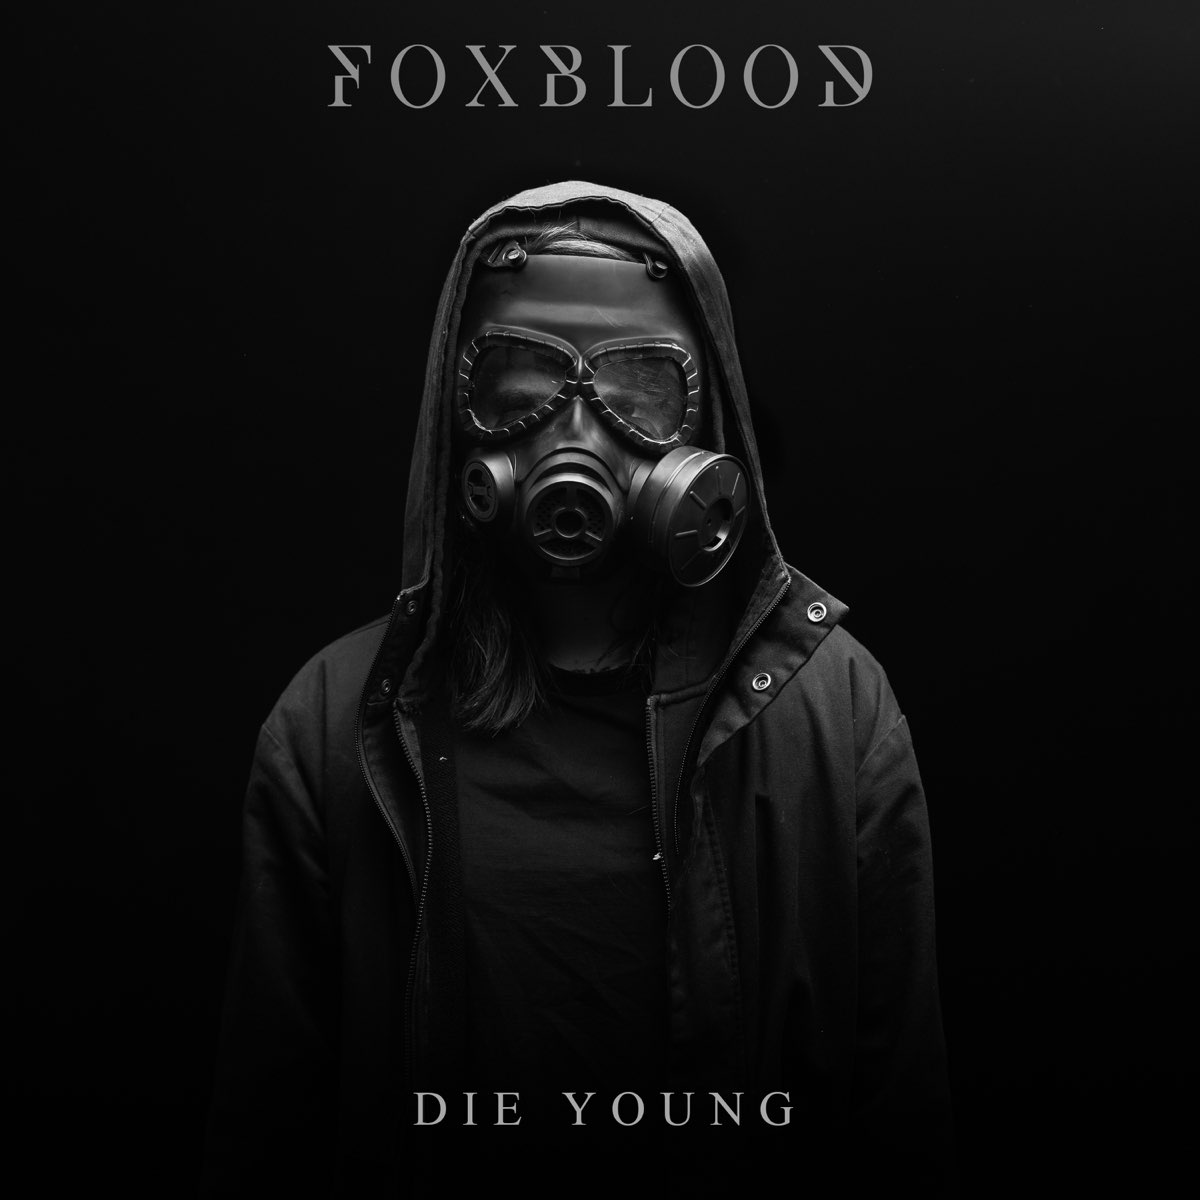 Life die young. Die young Song обложка. Foxblood the Devil the Dark the Rain album.